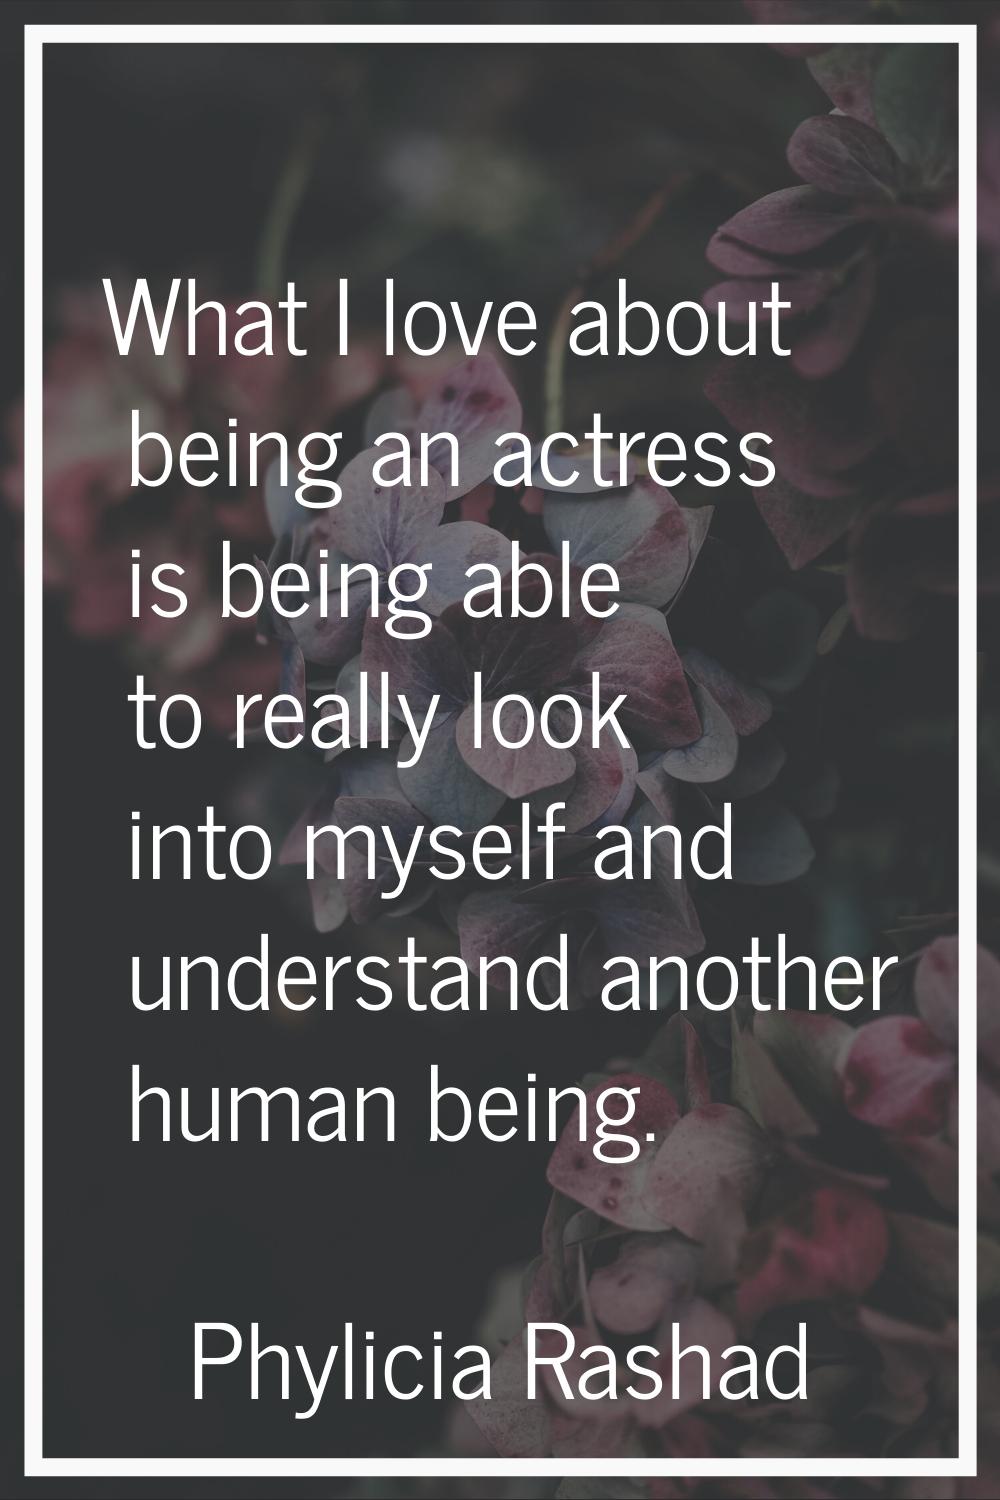 What I love about being an actress is being able to really look into myself and understand another 